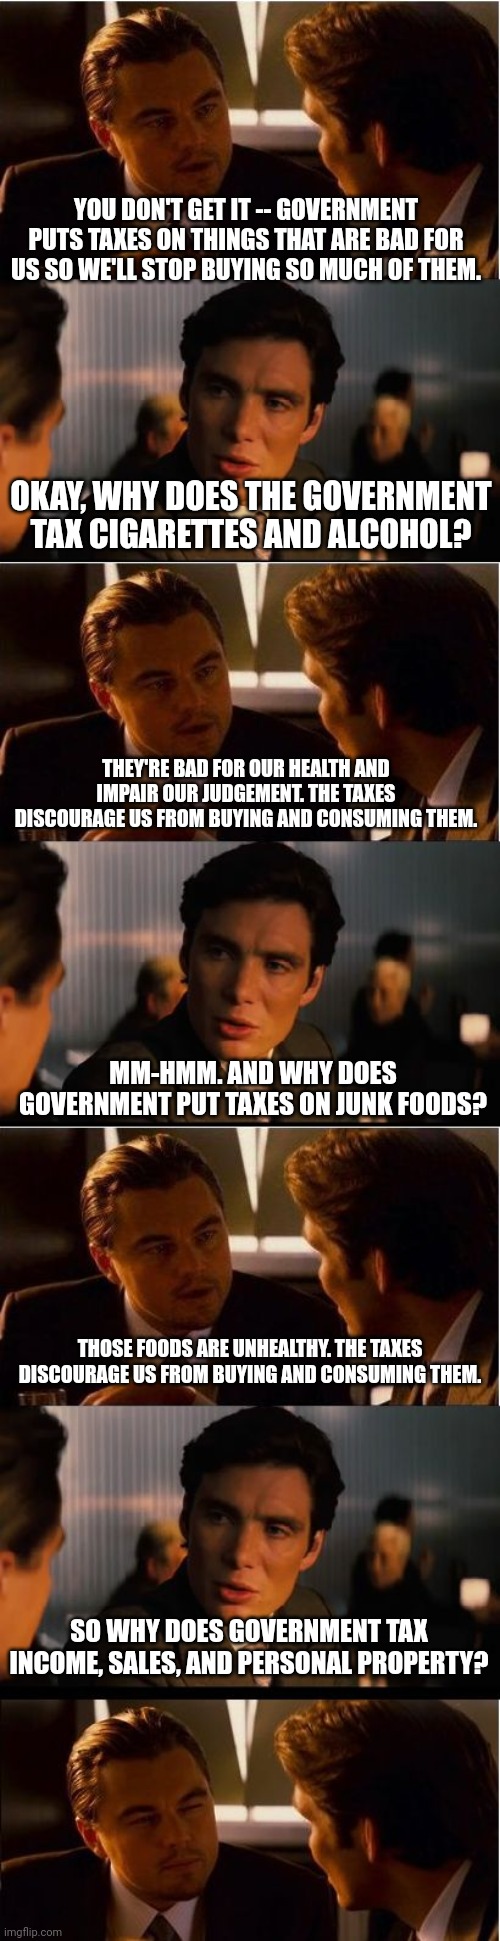 Taxation is extortion for living. | YOU DON'T GET IT -- GOVERNMENT PUTS TAXES ON THINGS THAT ARE BAD FOR US SO WE'LL STOP BUYING SO MUCH OF THEM. OKAY, WHY DOES THE GOVERNMENT TAX CIGARETTES AND ALCOHOL? THEY'RE BAD FOR OUR HEALTH AND IMPAIR OUR JUDGEMENT. THE TAXES DISCOURAGE US FROM BUYING AND CONSUMING THEM. MM-HMM. AND WHY DOES GOVERNMENT PUT TAXES ON JUNK FOODS? THOSE FOODS ARE UNHEALTHY. THE TAXES DISCOURAGE US FROM BUYING AND CONSUMING THEM. SO WHY DOES GOVERNMENT TAX INCOME, SALES, AND PERSONAL PROPERTY? | image tagged in memes,inception | made w/ Imgflip meme maker